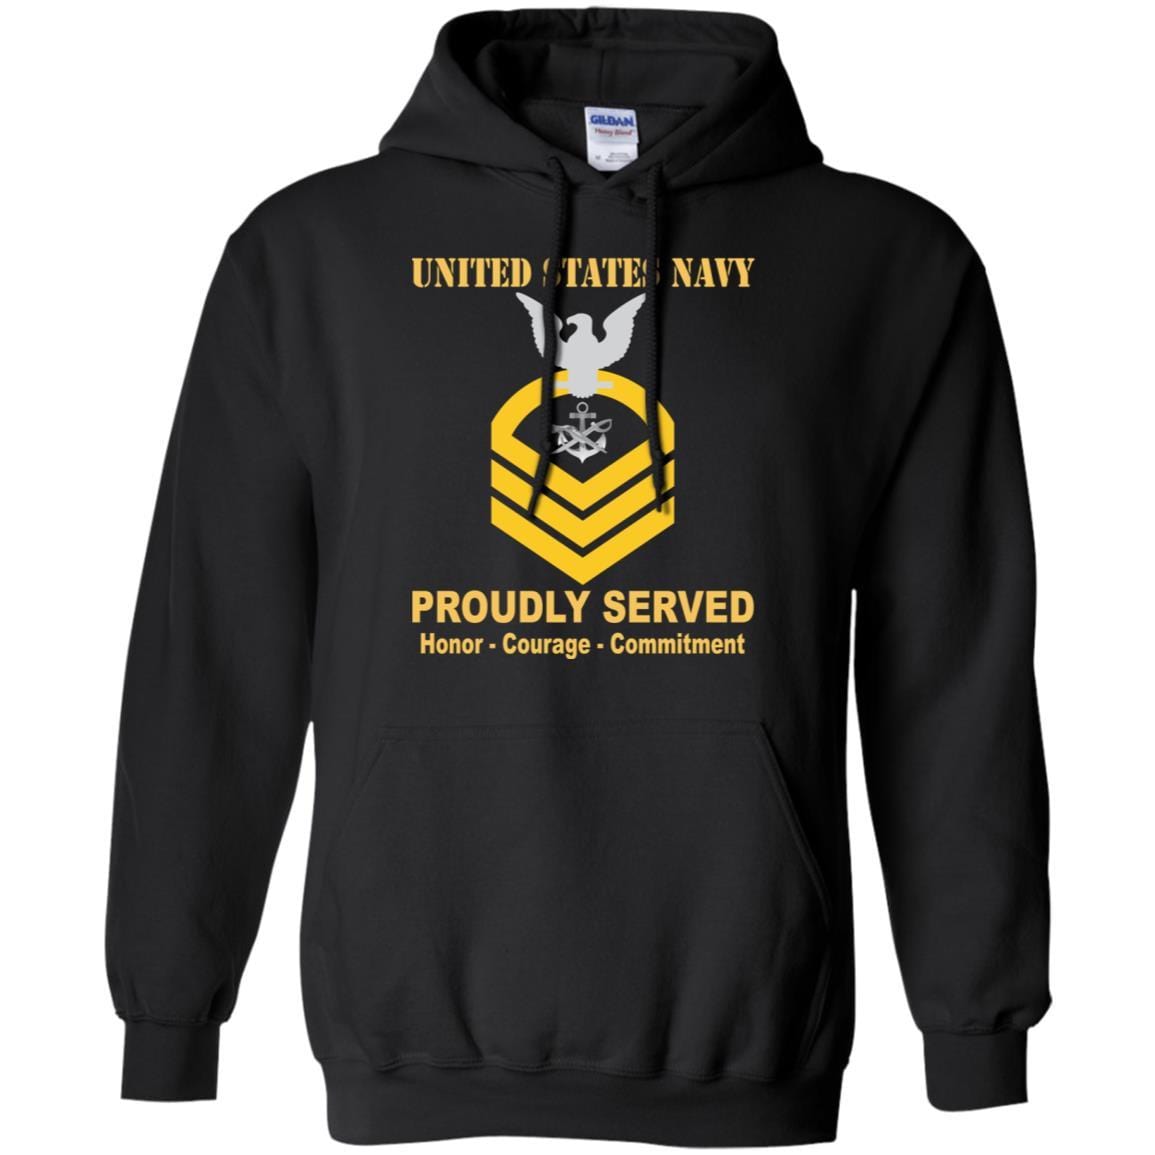 Navy Special Warfare Boat Operator Navy SB E-7 Rating Badges Proudly Served T-Shirt For Men On Front-TShirt-Navy-Veterans Nation